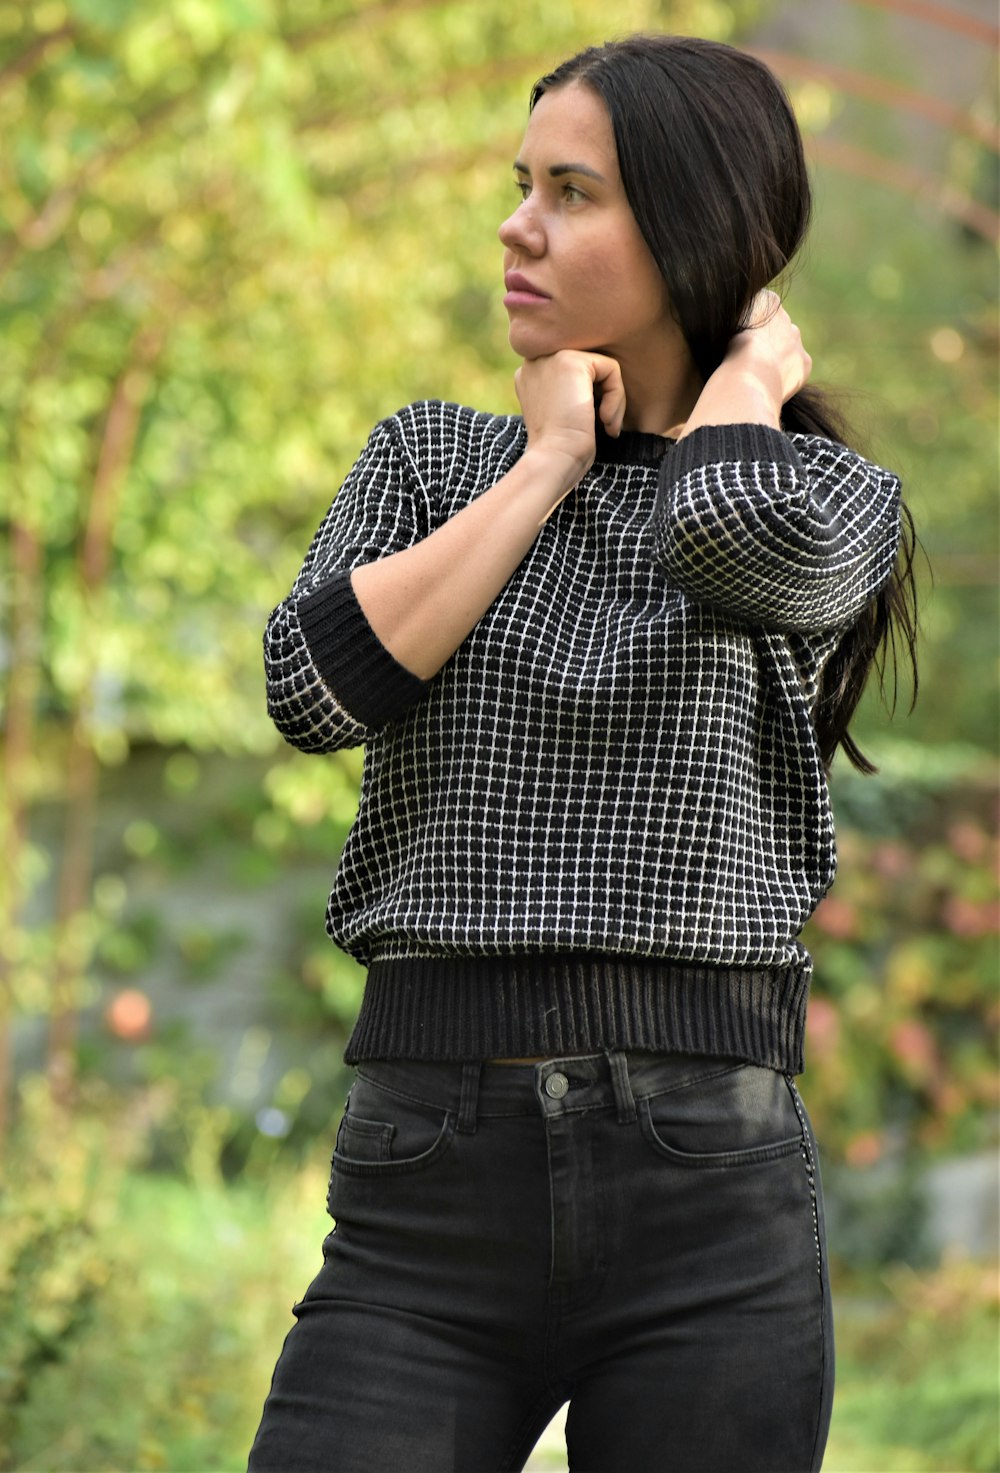 a woman in a black and white shirt and jeans